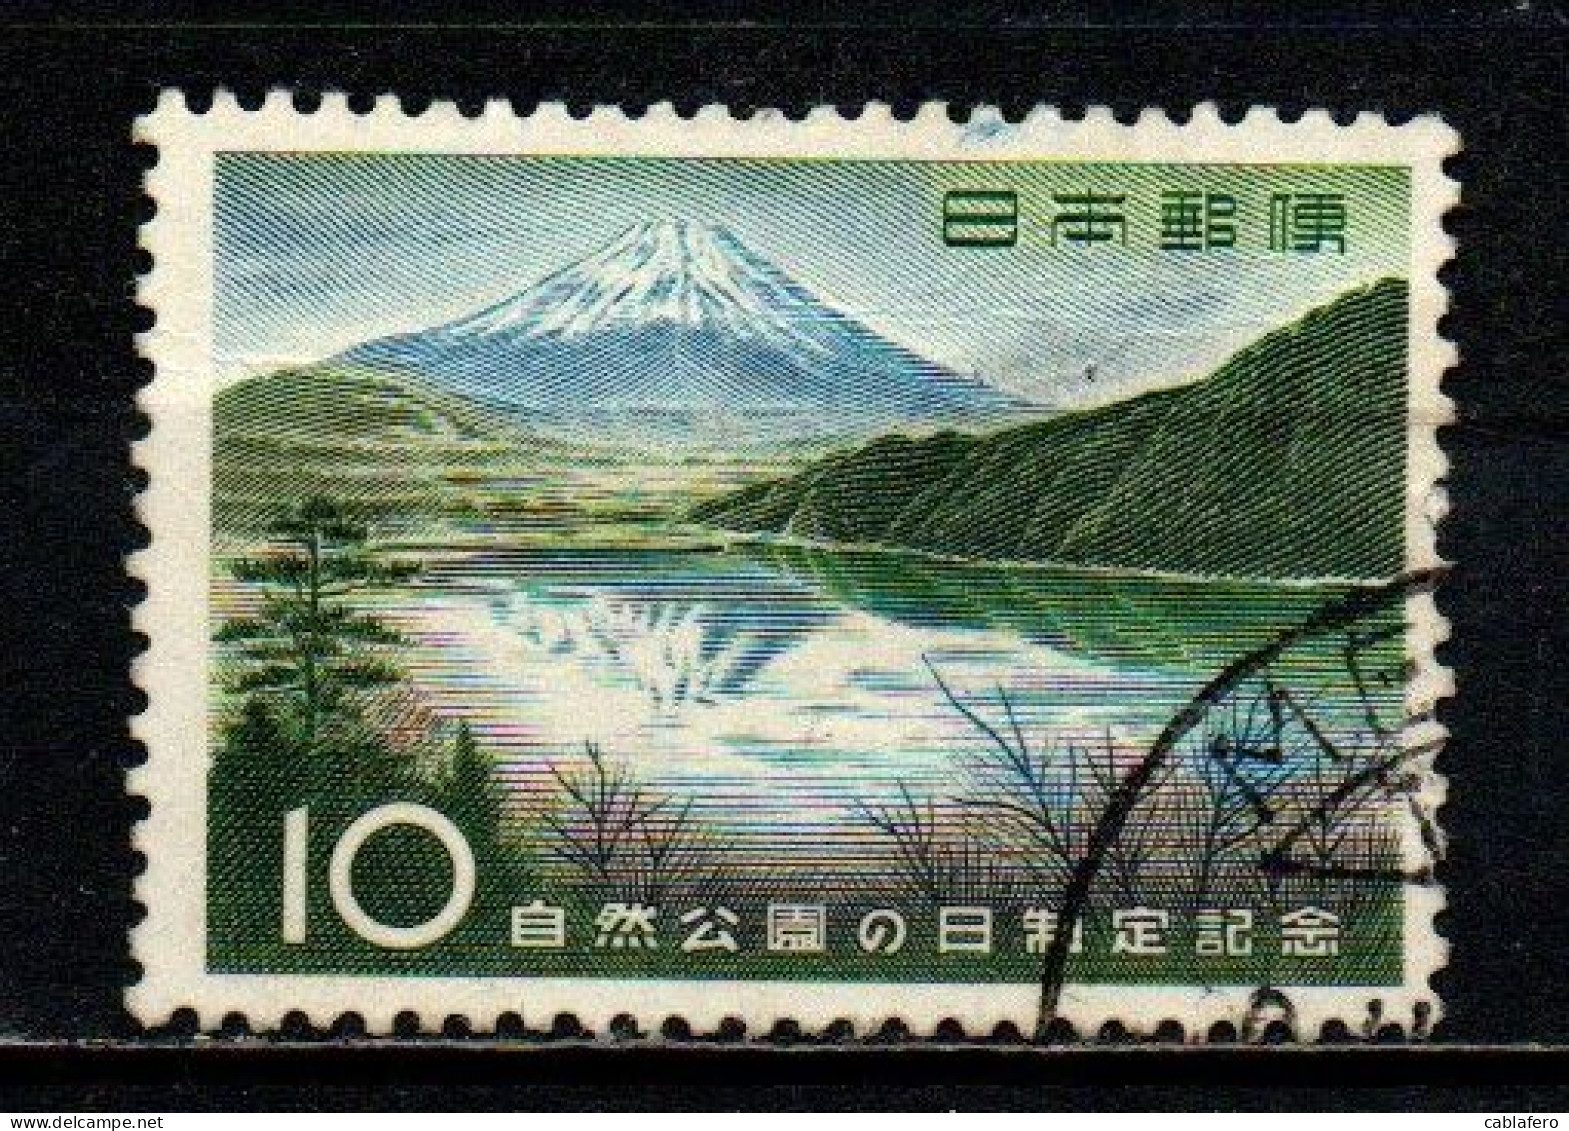 GIAPPONE - 1959 - Establishment Of Natural Park Day And 1st Natural Park Convention - Mt. Fuji And Lake Motosu - USATO - Gebraucht